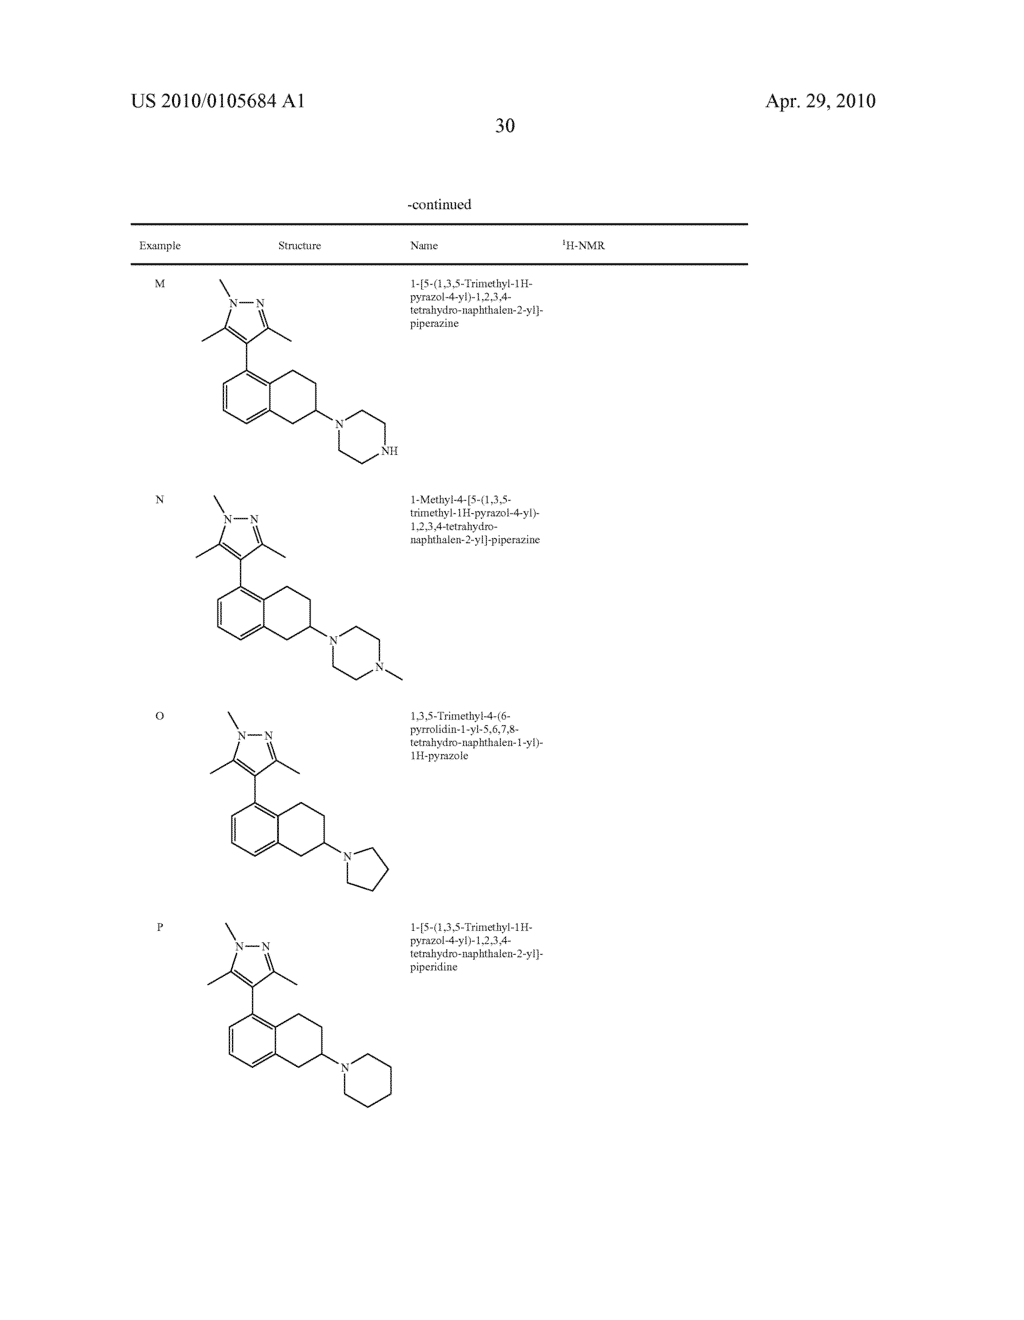 HETEROCYCLYL-SUBSTITUTED-TETRAHYDRO-NAPHTHALEN-AMINE DERIVATIVES, THEIR PREPARATION AND USE AS MEDICAMENTS - diagram, schematic, and image 31